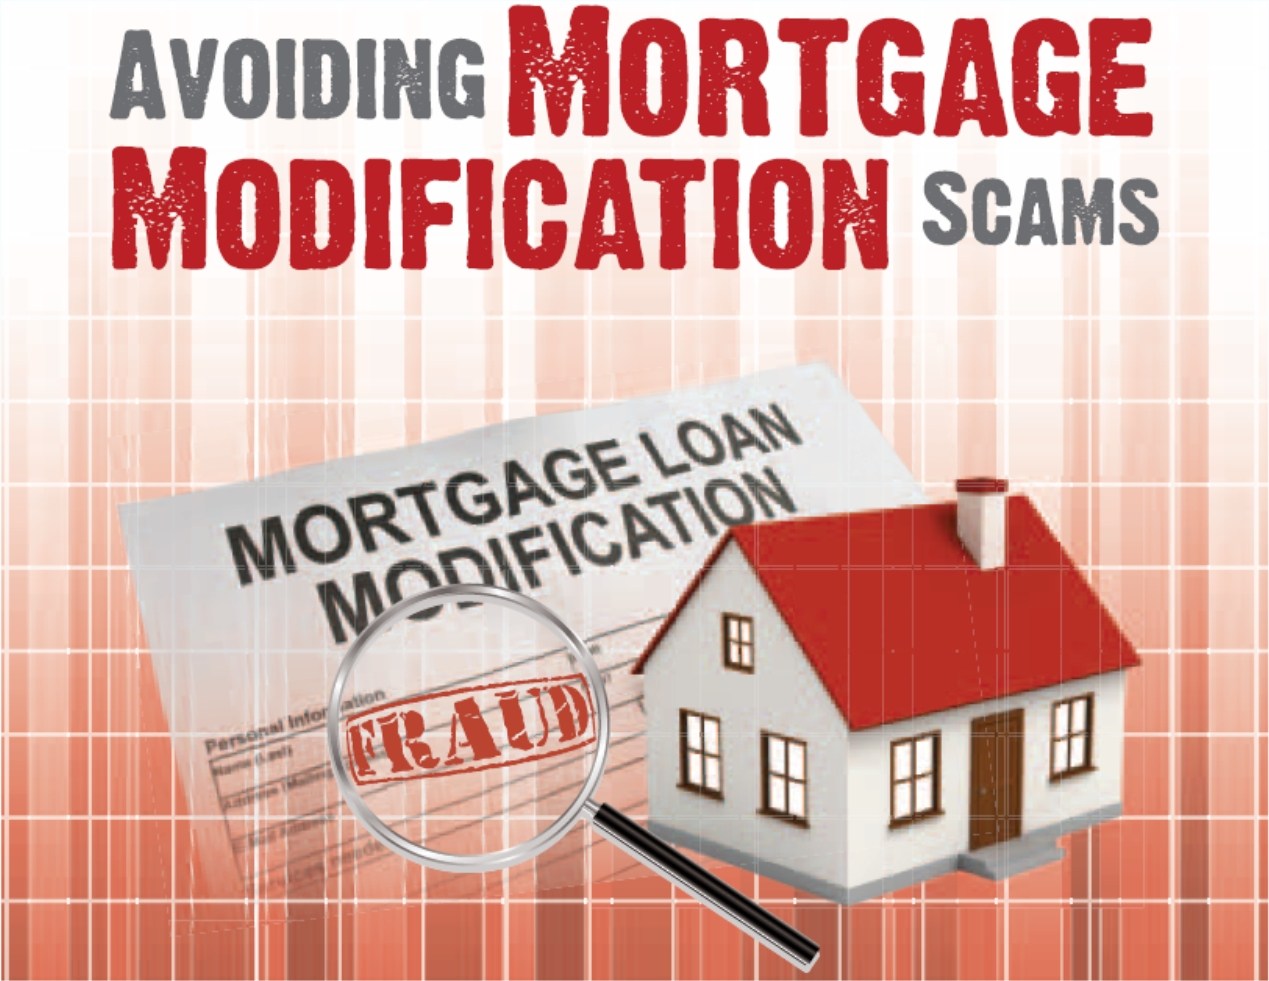 Avoid foreclosure loan modification scammers